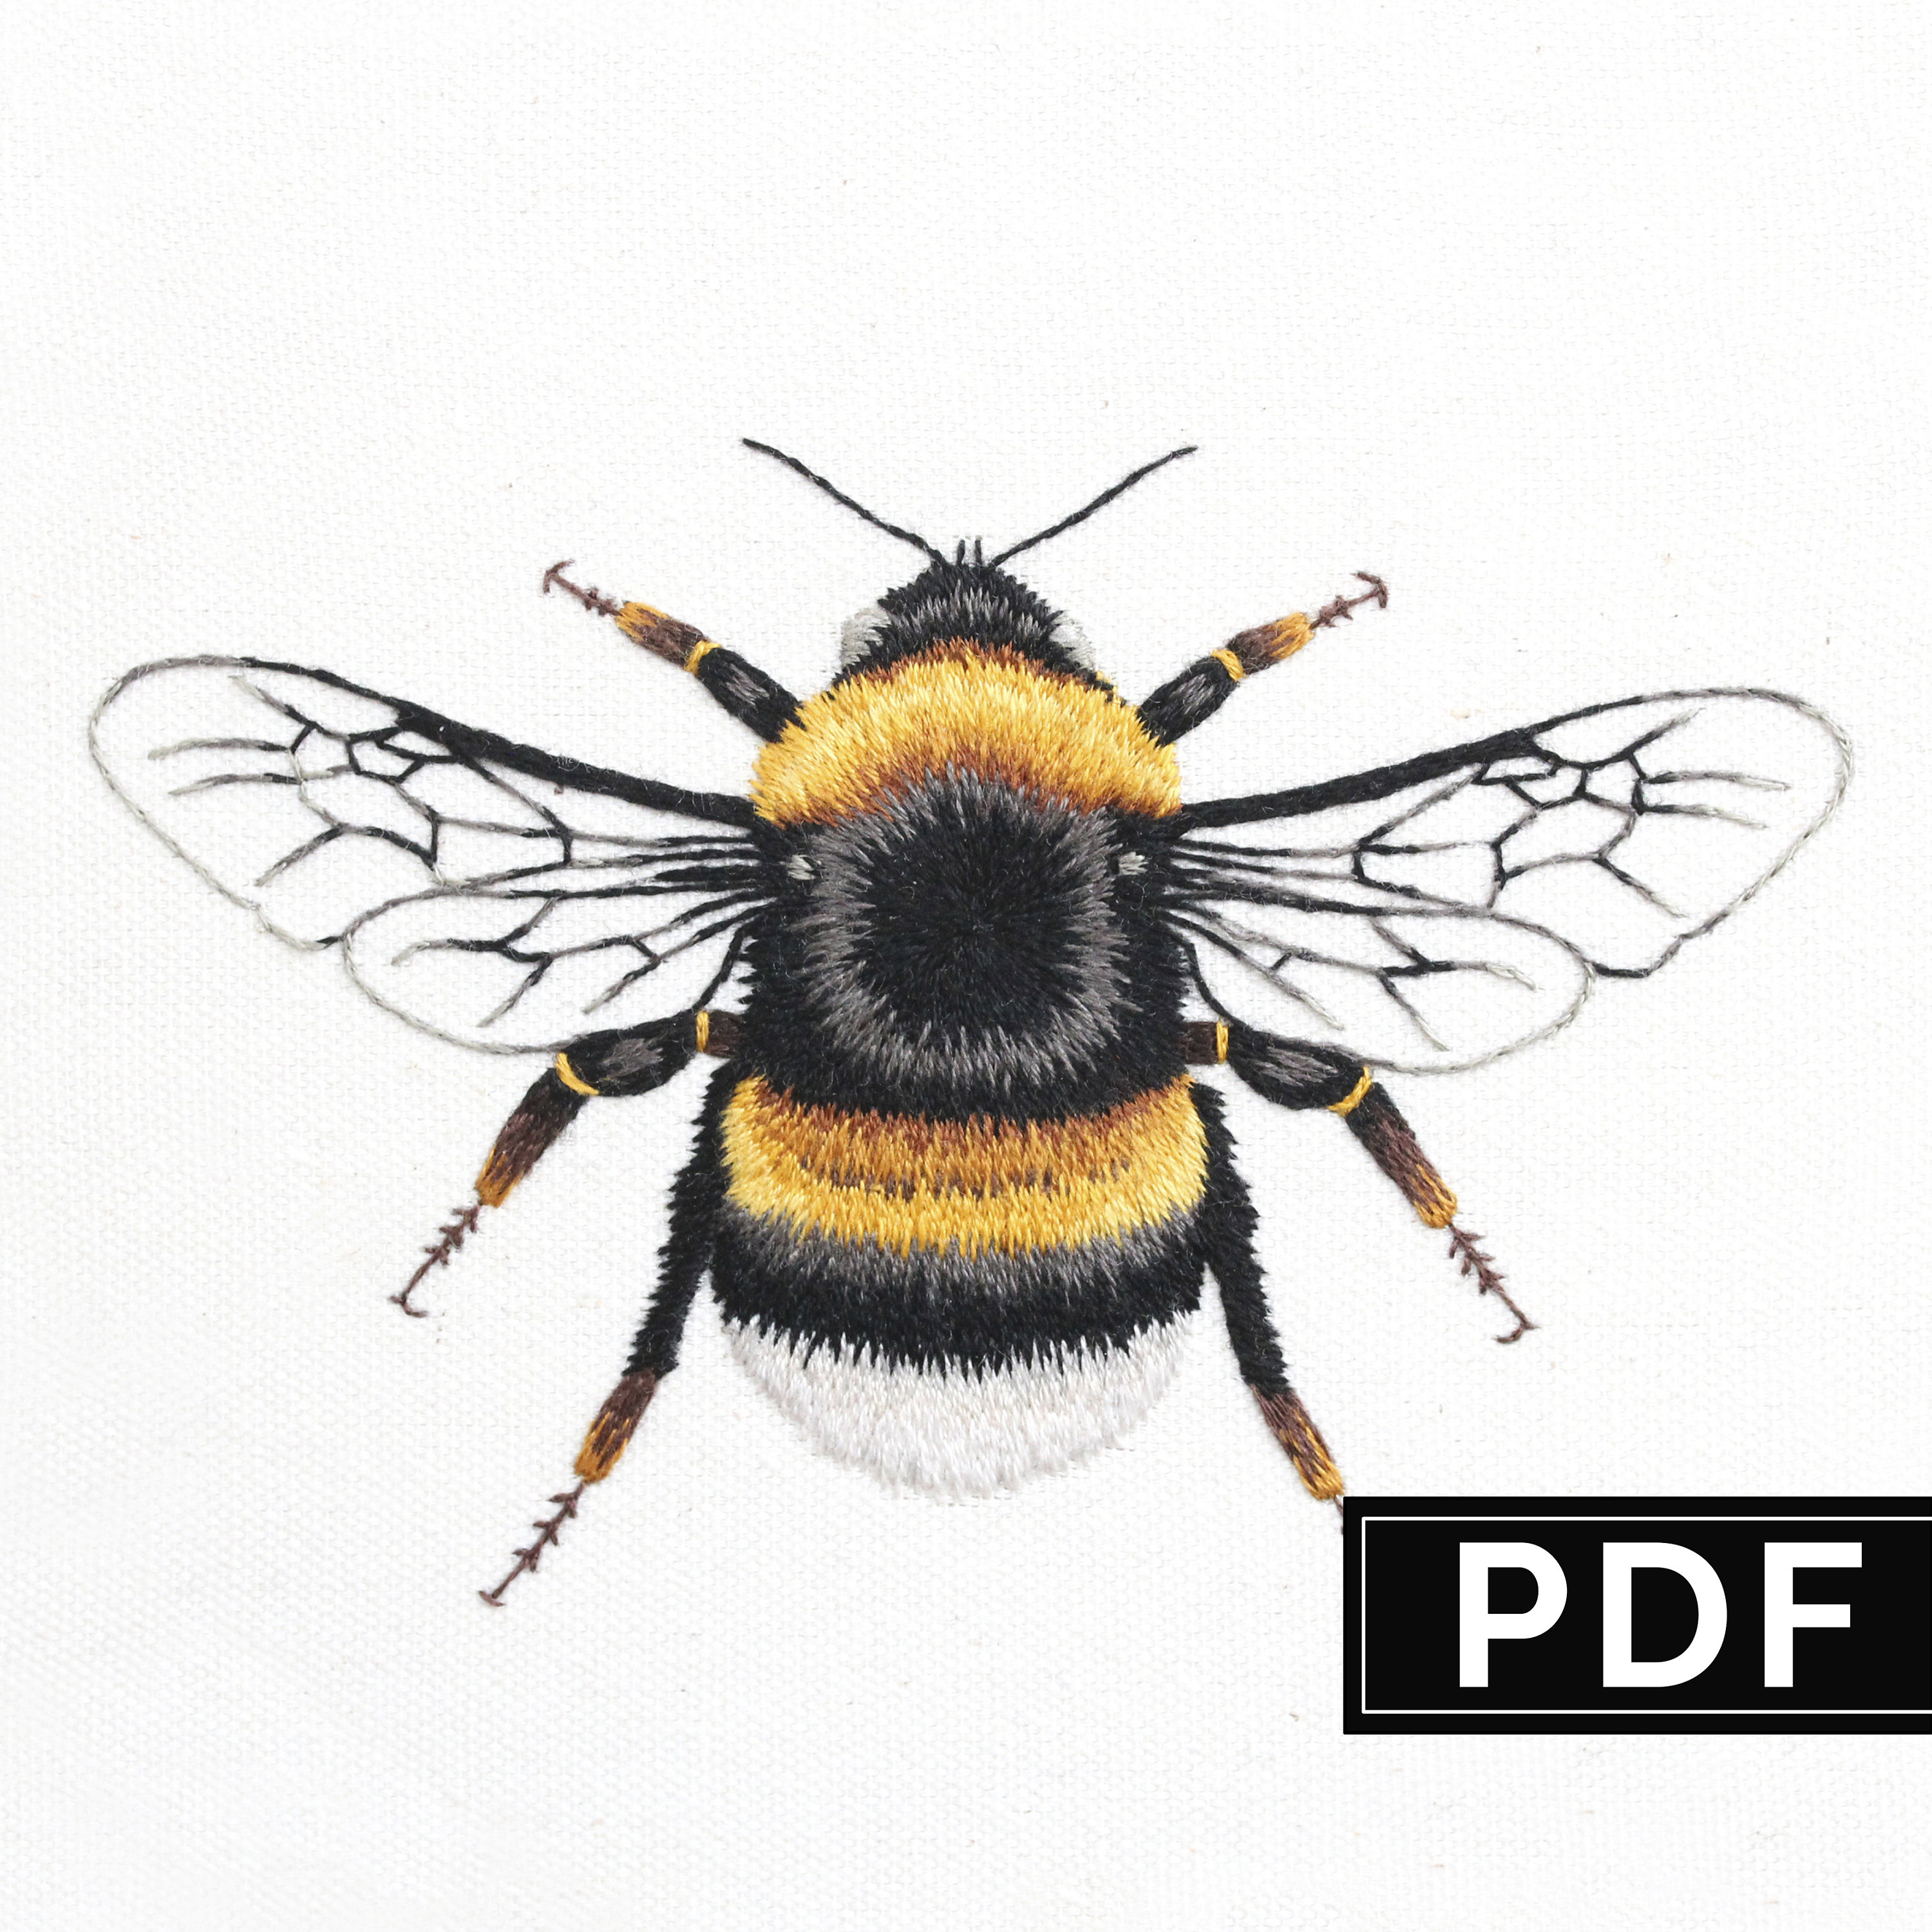 Bumble Bee Embroidery Pattern Bee Hand Embroidery Pattern Thread Painting Tutorial Pdf Digital Embroidery Guide Learn How To Paint With Thread Bumblebee Hoop Art